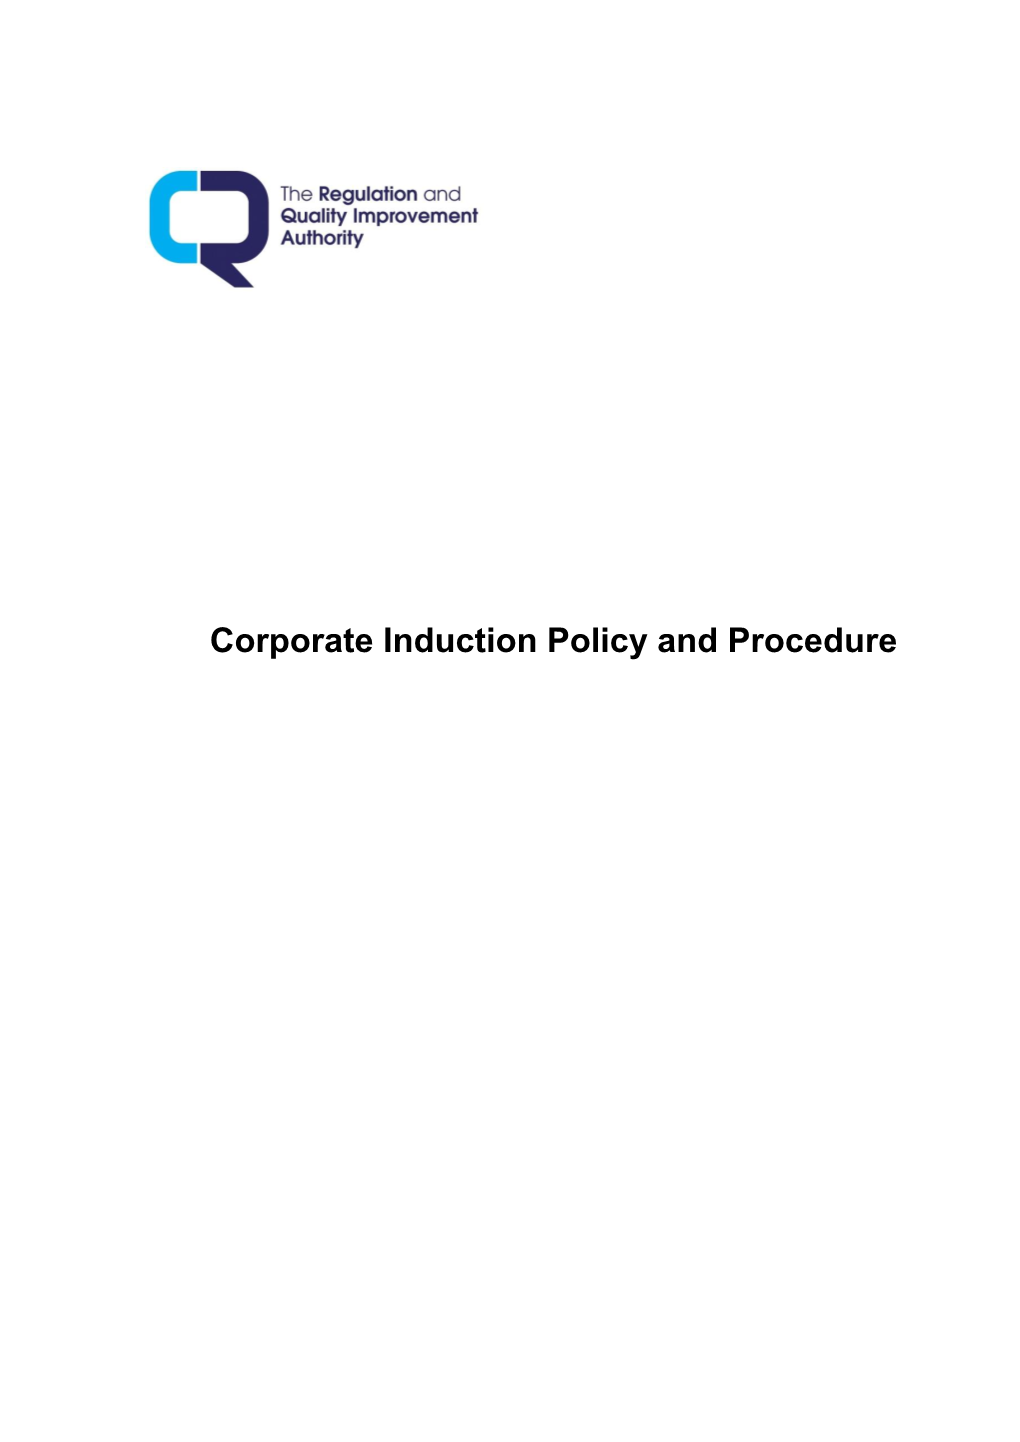 Corporate Induction Policy and Procedure